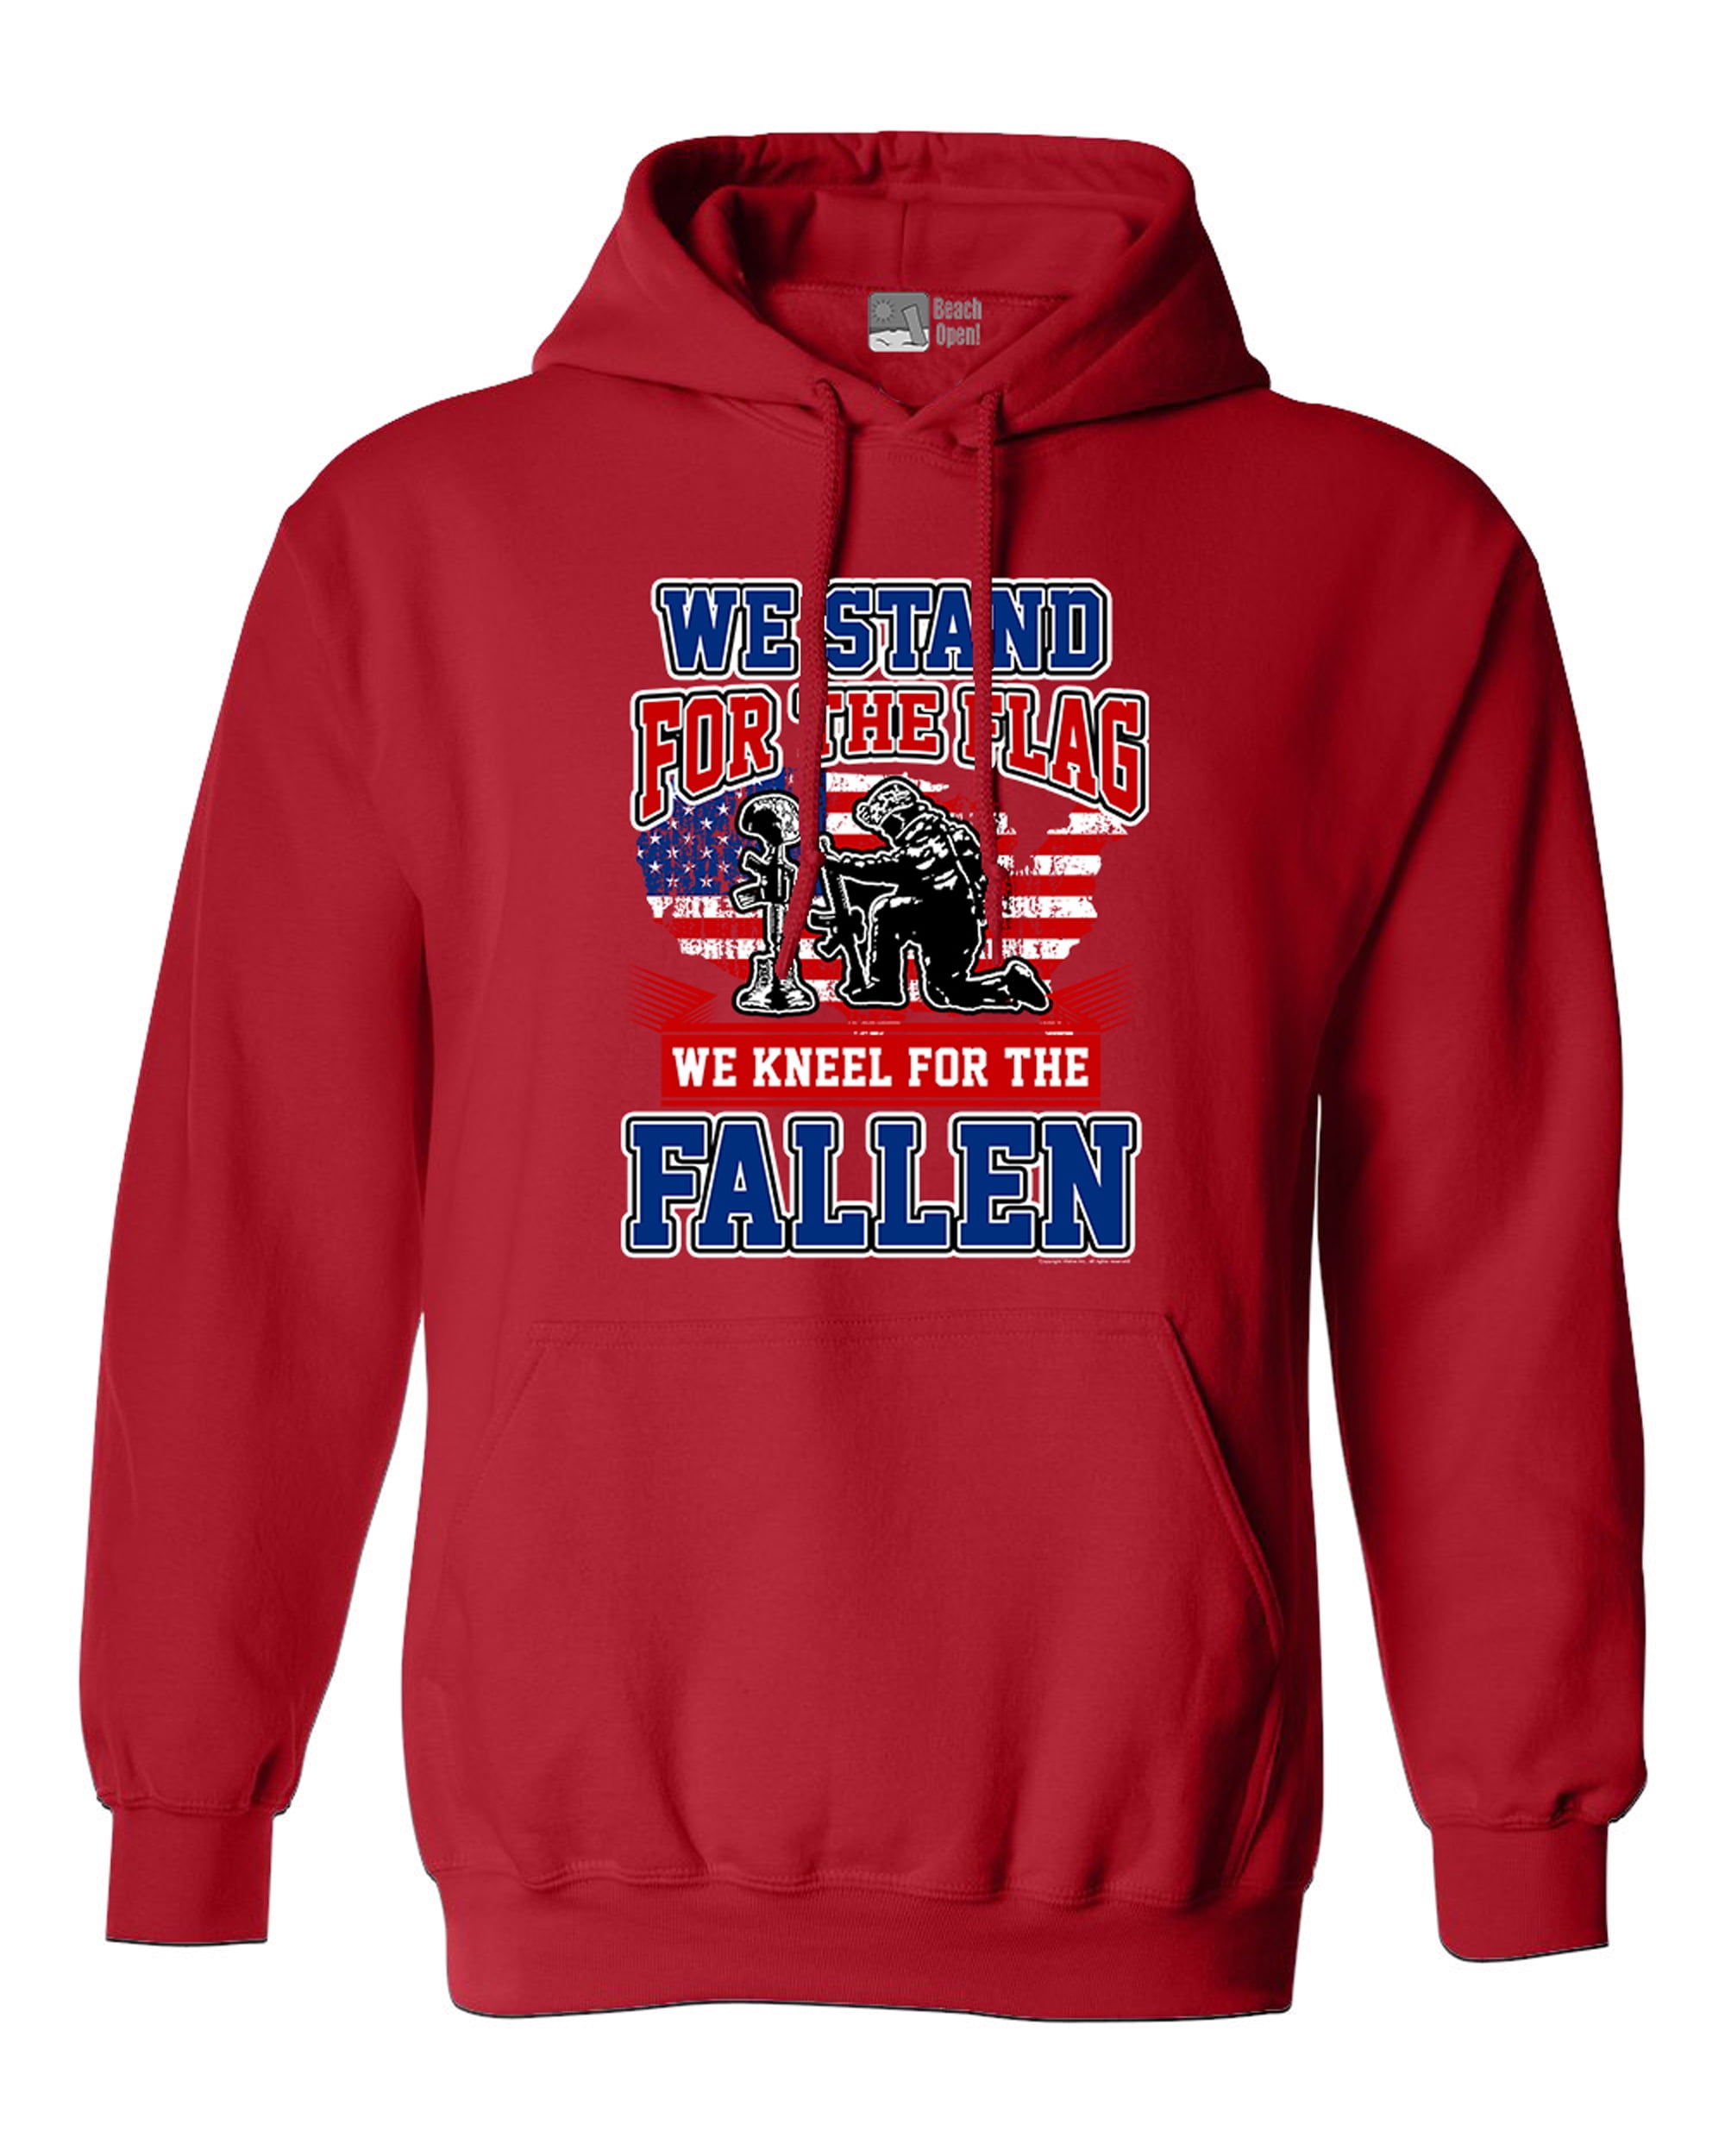 A I Stand For The Flag Kneel For The Fallen Patriotic DT Crewneck Sweatshirt 